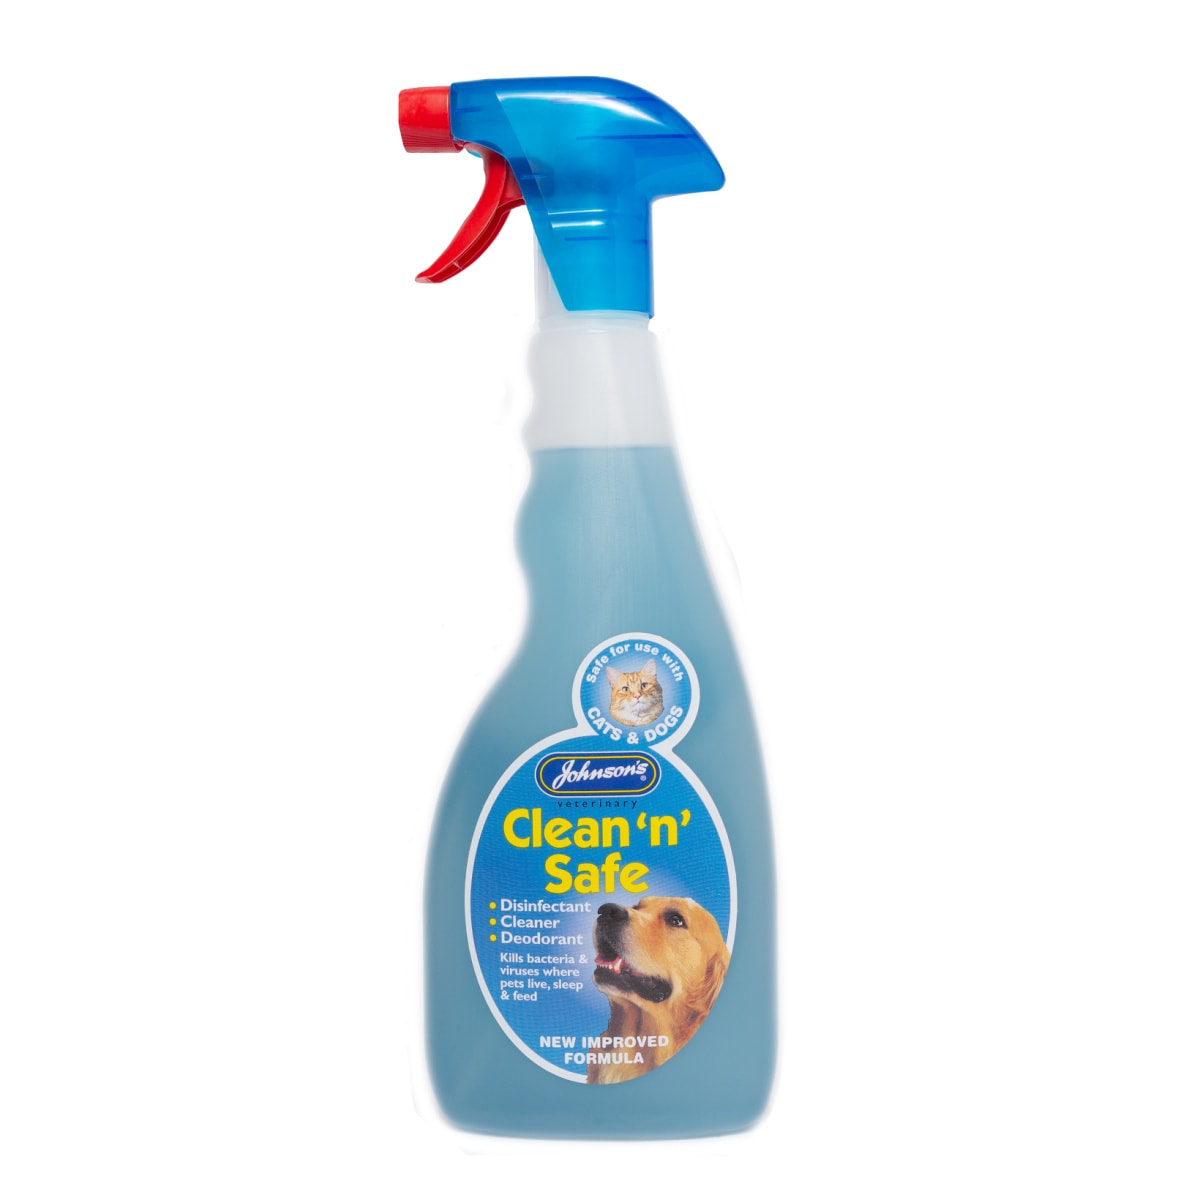 Johnson's Clean ‘n’ safe for Cats & Dogs 500ml Main Image